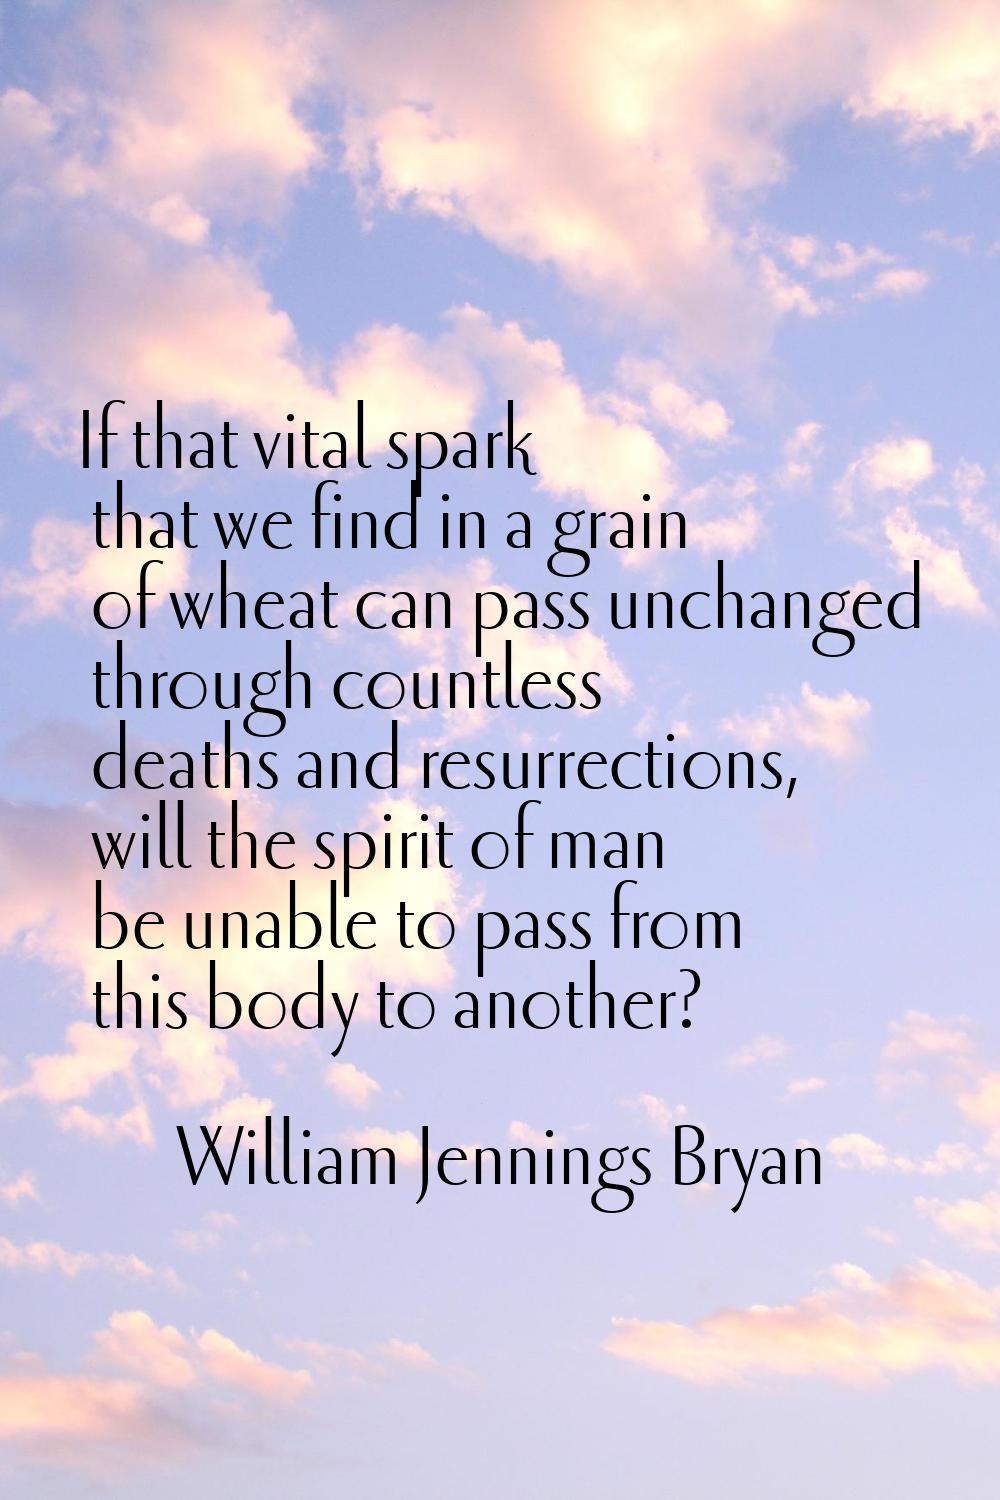 If that vital spark that we find in a grain of wheat can pass unchanged through countless deaths an